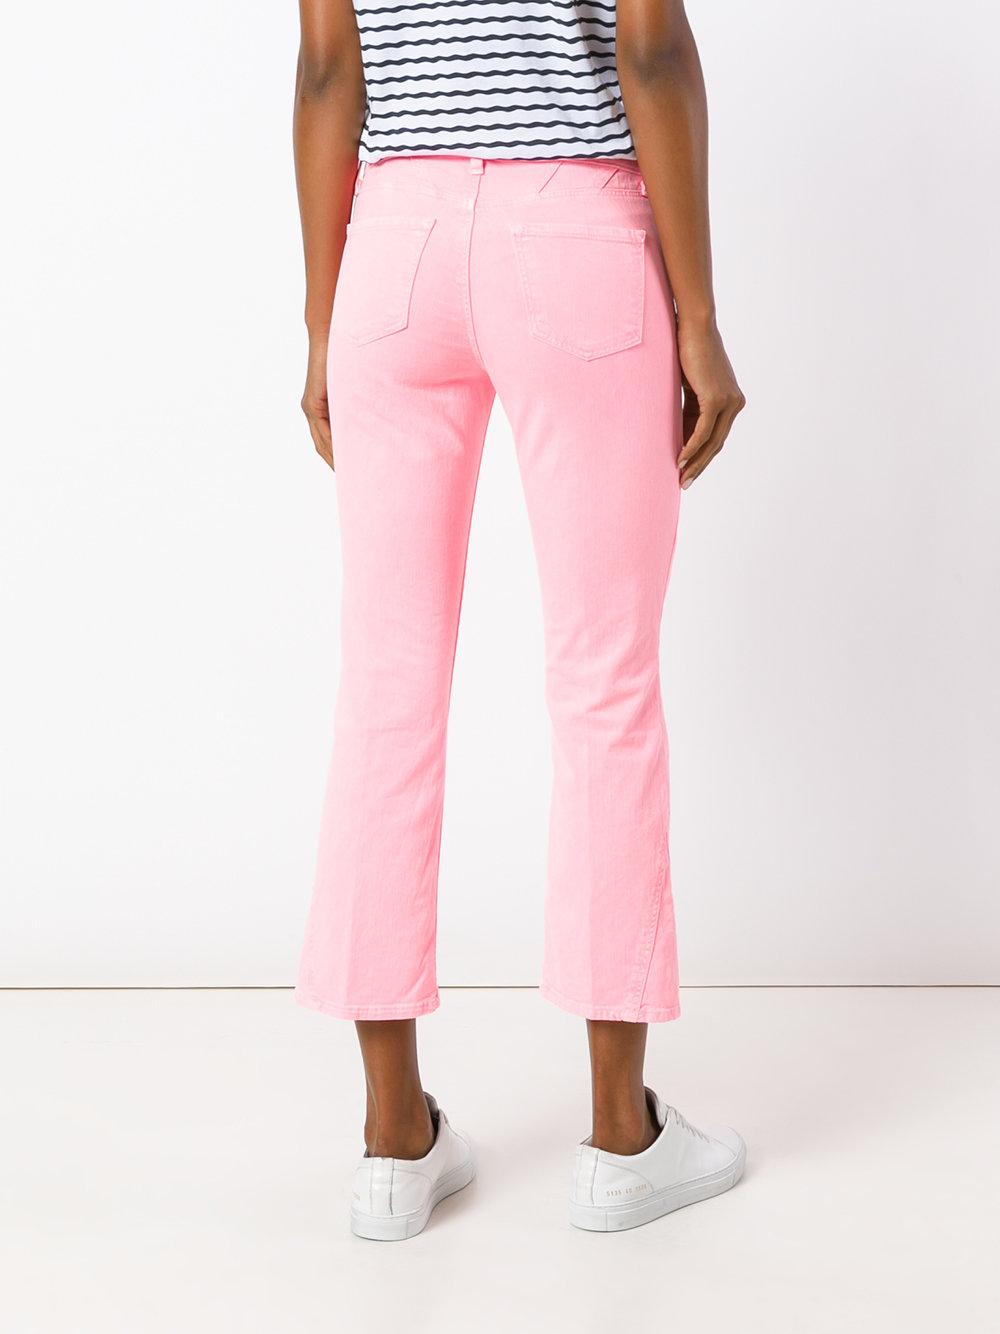 Lyst - J Brand Bootcut Jeans in Pink